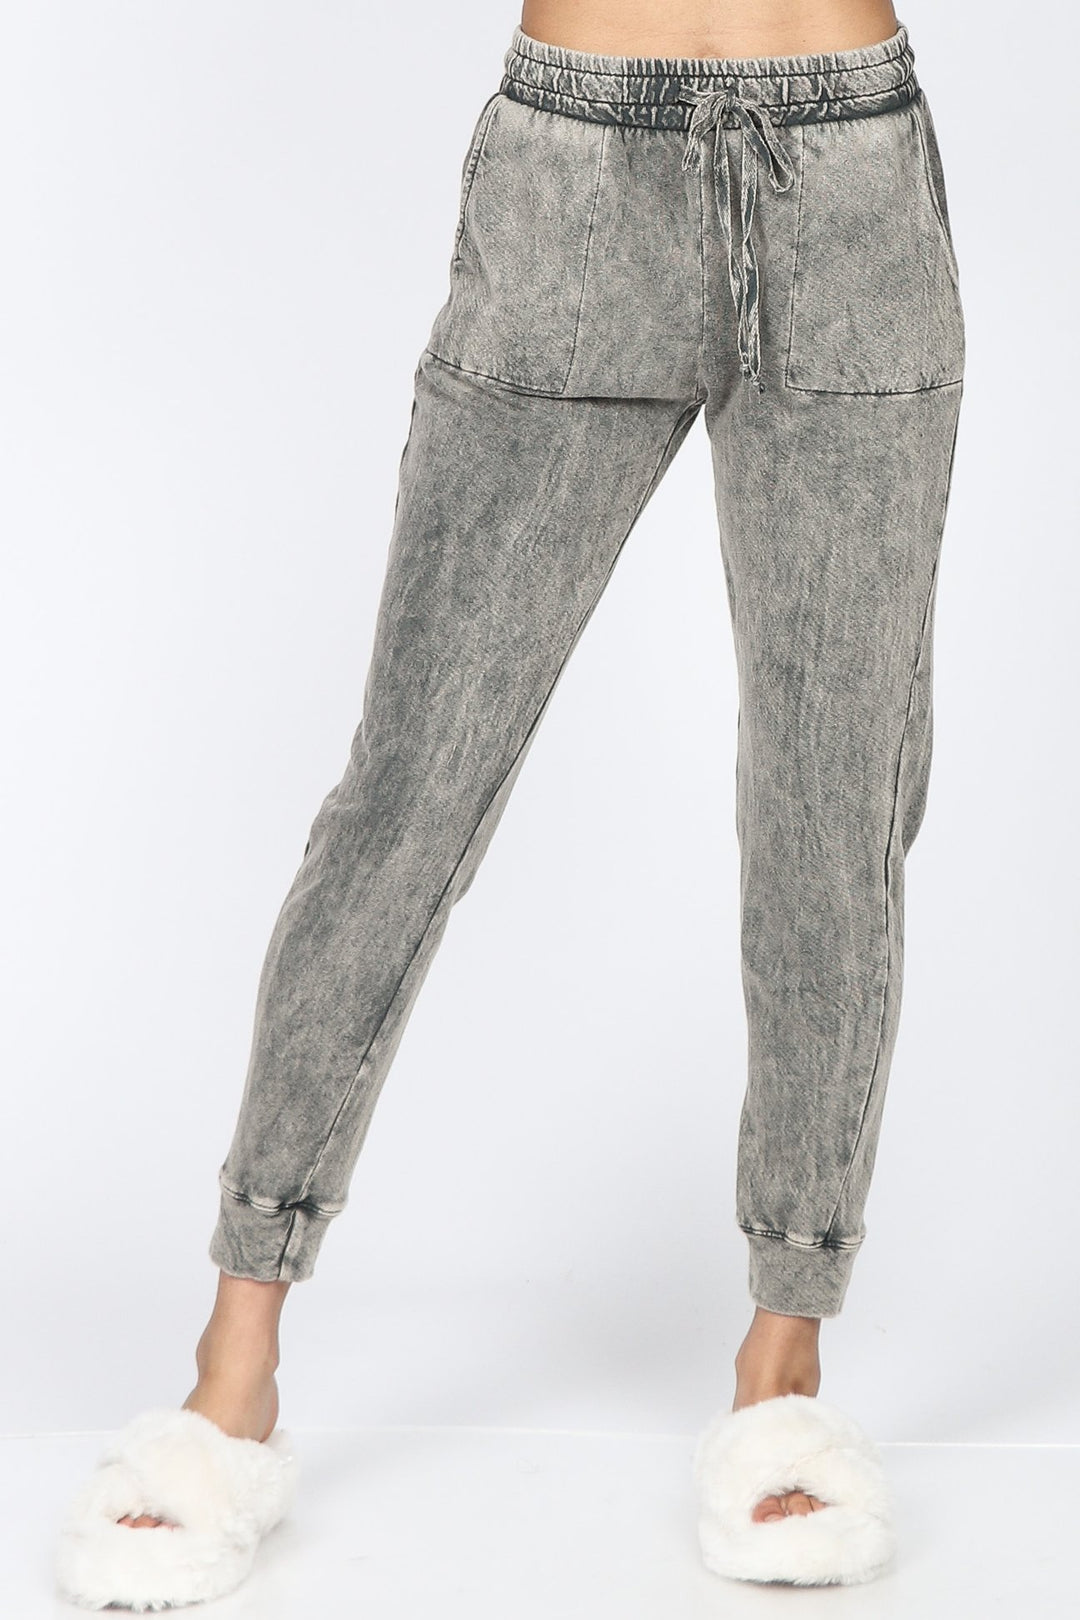 MINERAL WASH JOGGERS - Kingfisher Road - Online Boutique